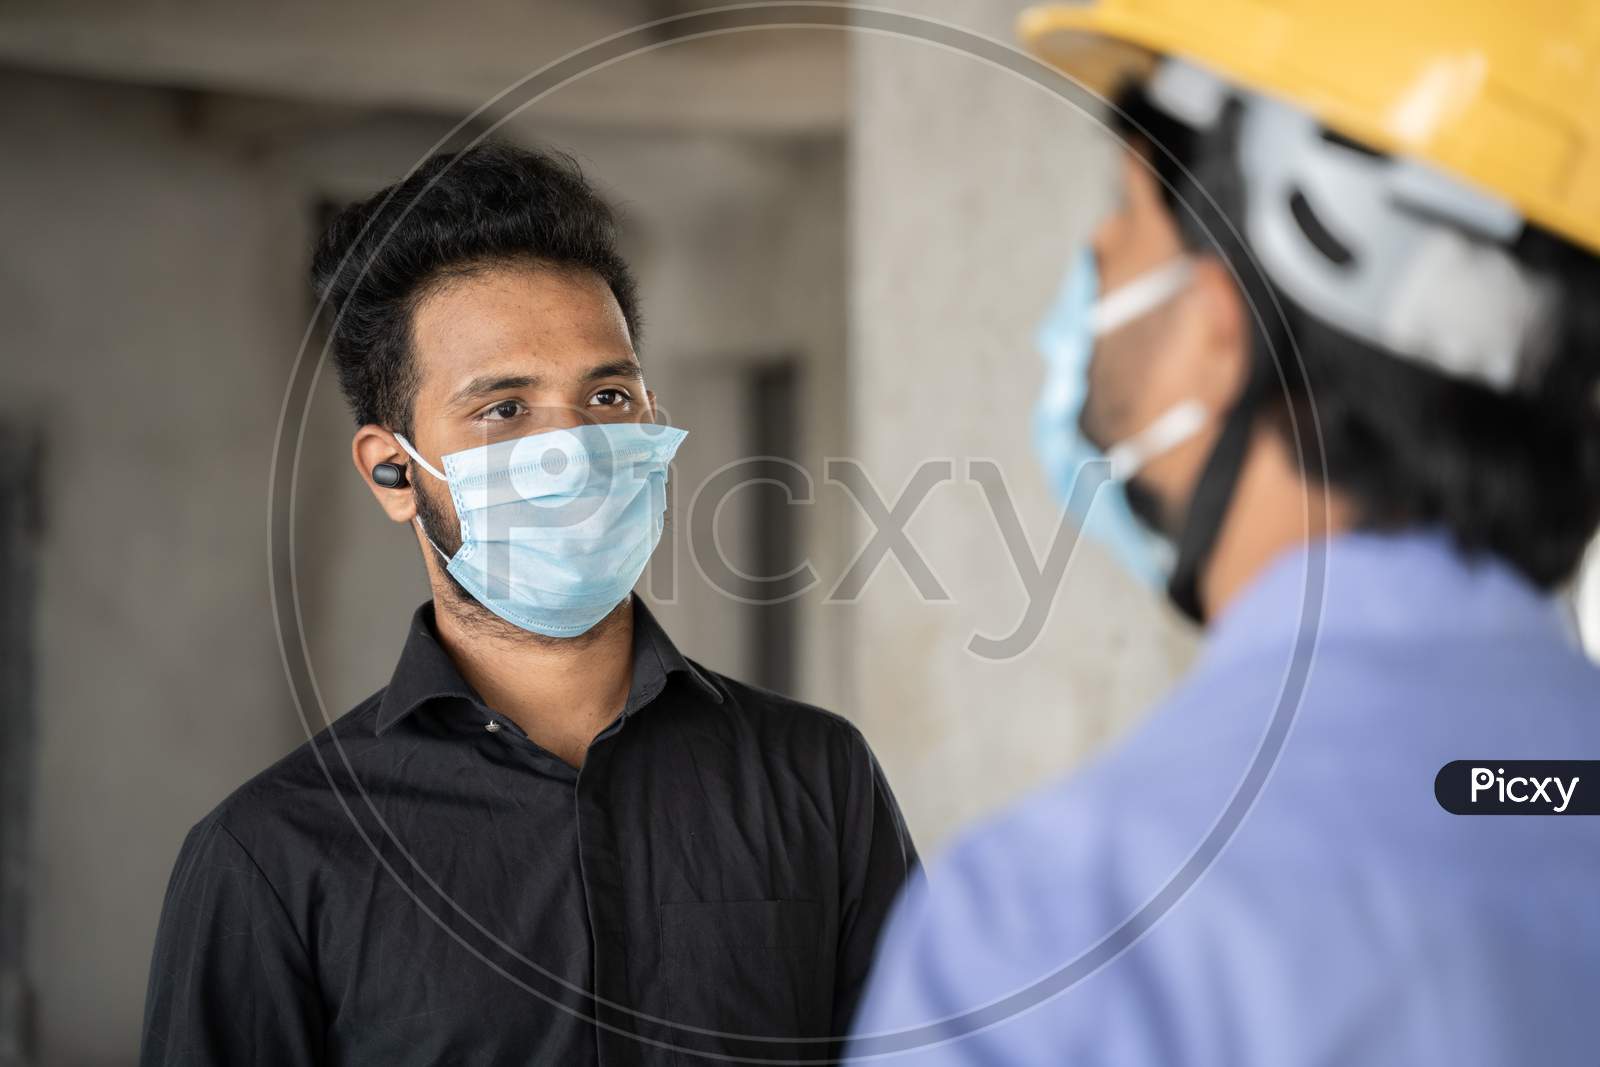 Shoulder Shot, Construction Worker And Engineer At Site Talking By Wearing Medical Mask With Social Distance - Concept Of Business, Industry Reopen And Covid-19 Safety Measures At Workplace.